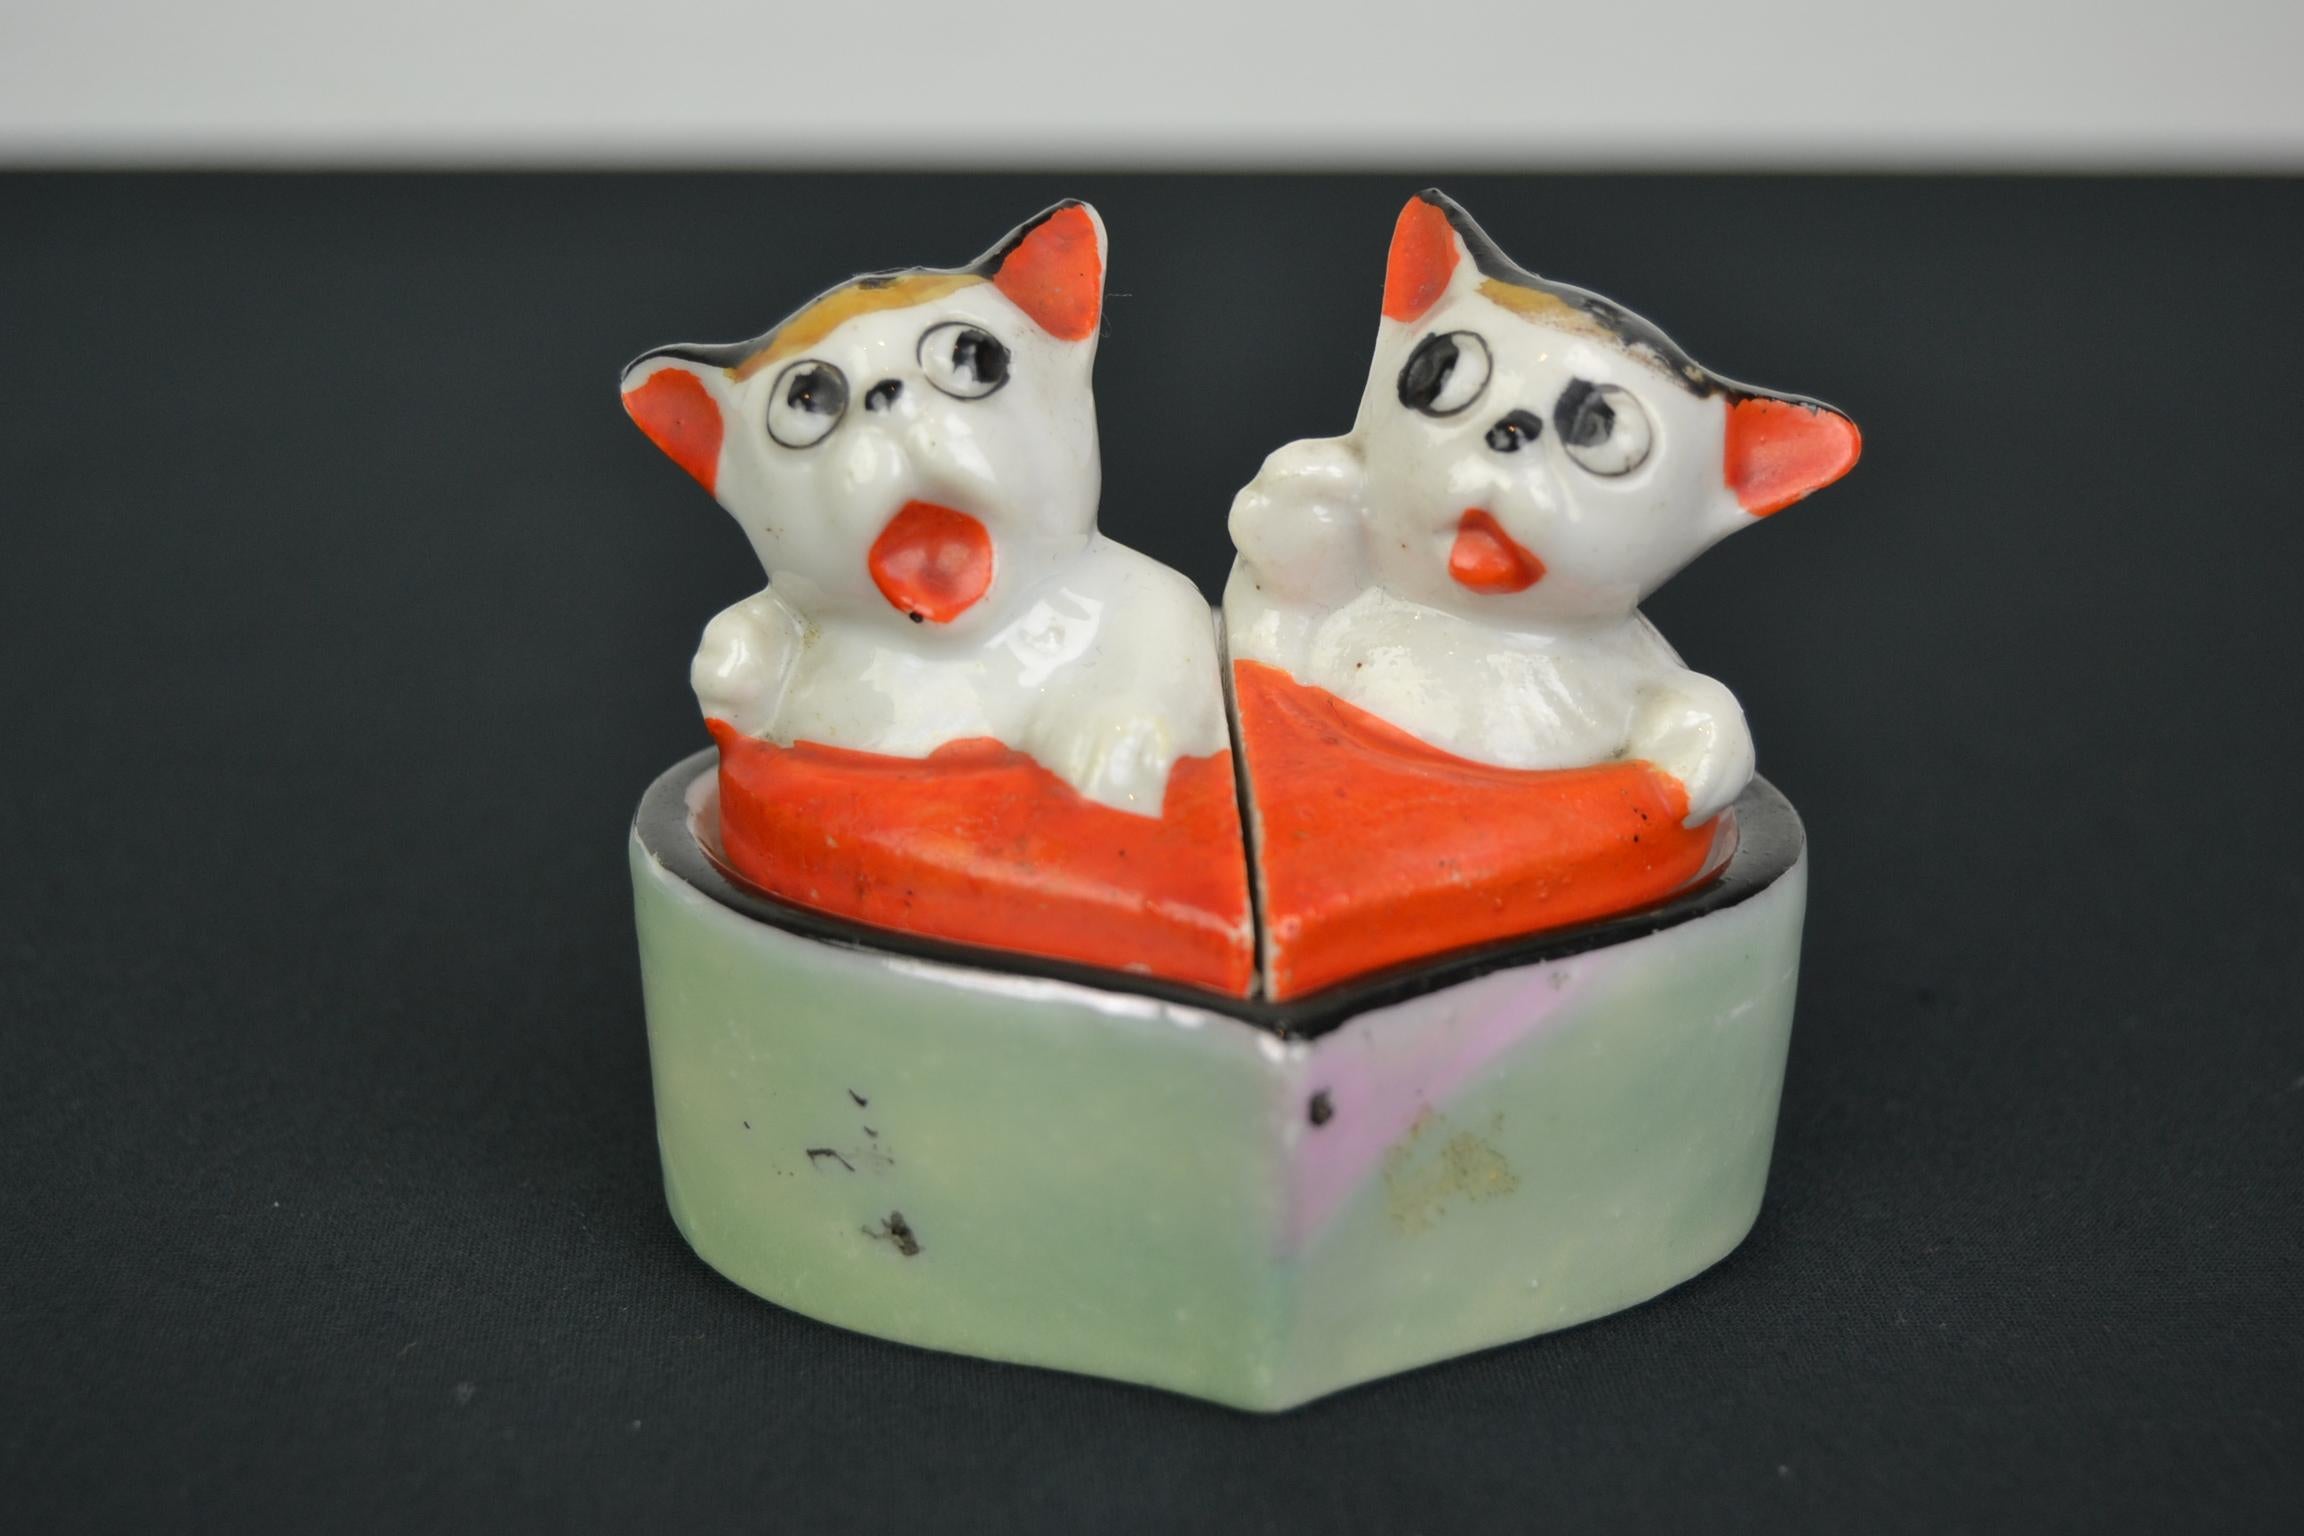 This is a set for a cat lover: 
Salt and pepper shaker set combined with mustard pot. 
Two cats ( salt and pepper shakers ) seated on a heart shaped - mustard pot. 
It's glazed hand-painted porcelain in the style of the Bonzo caricatures.